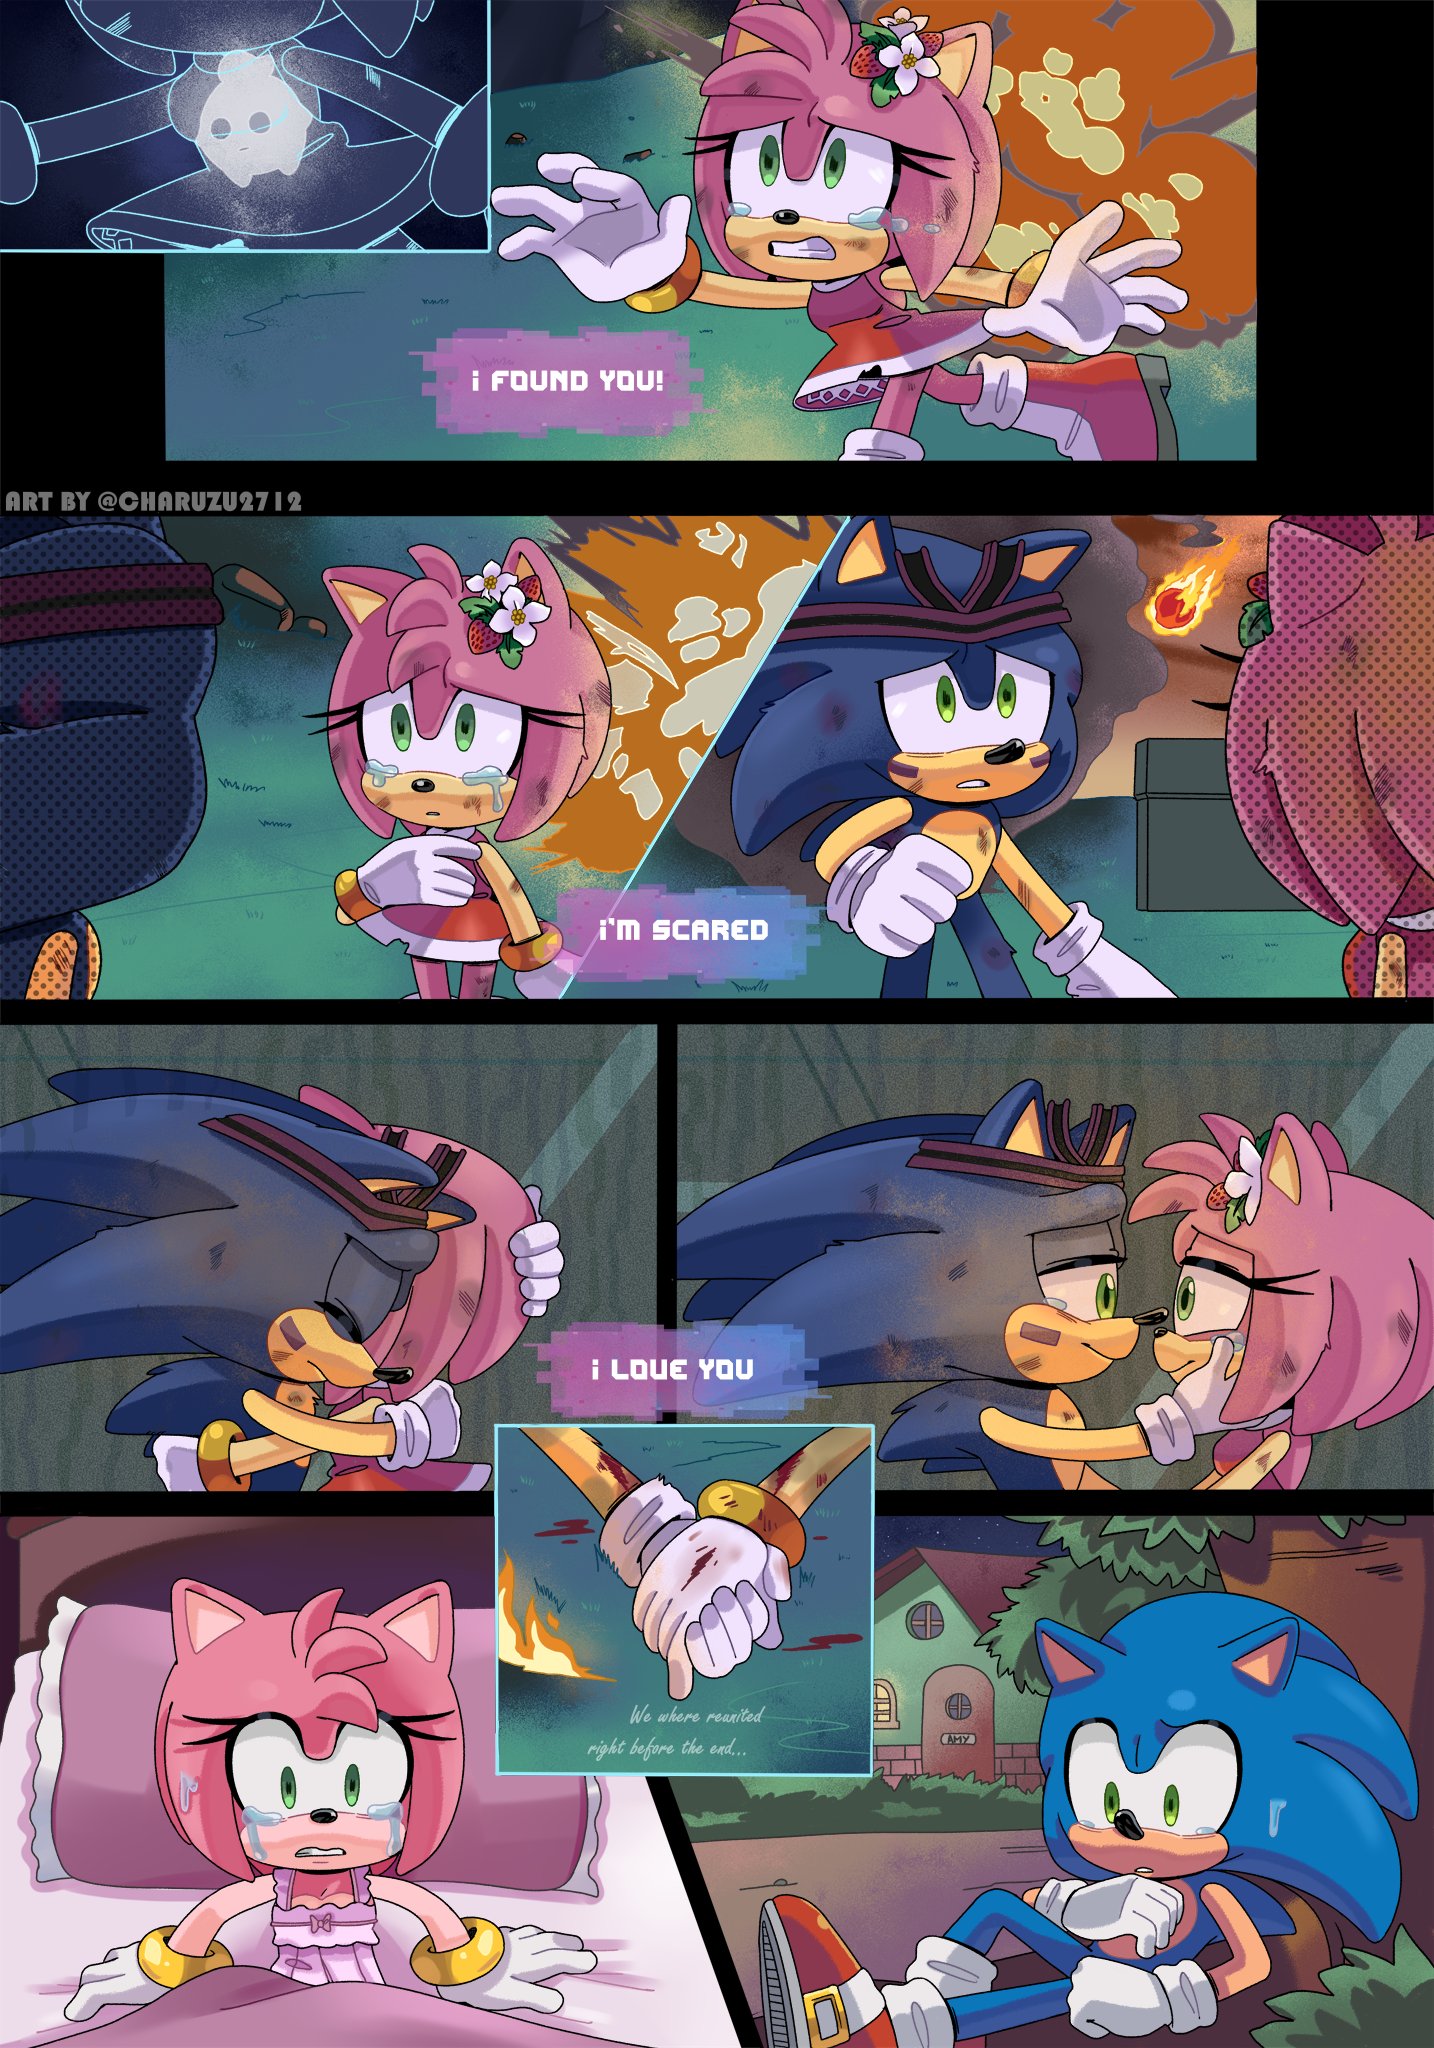 Daeream on X: First Part of my Sonamy Comic, 2k Special! There a more  pages left, but i will post the other parts laterThank you so much again  for the support! #SonAmy #